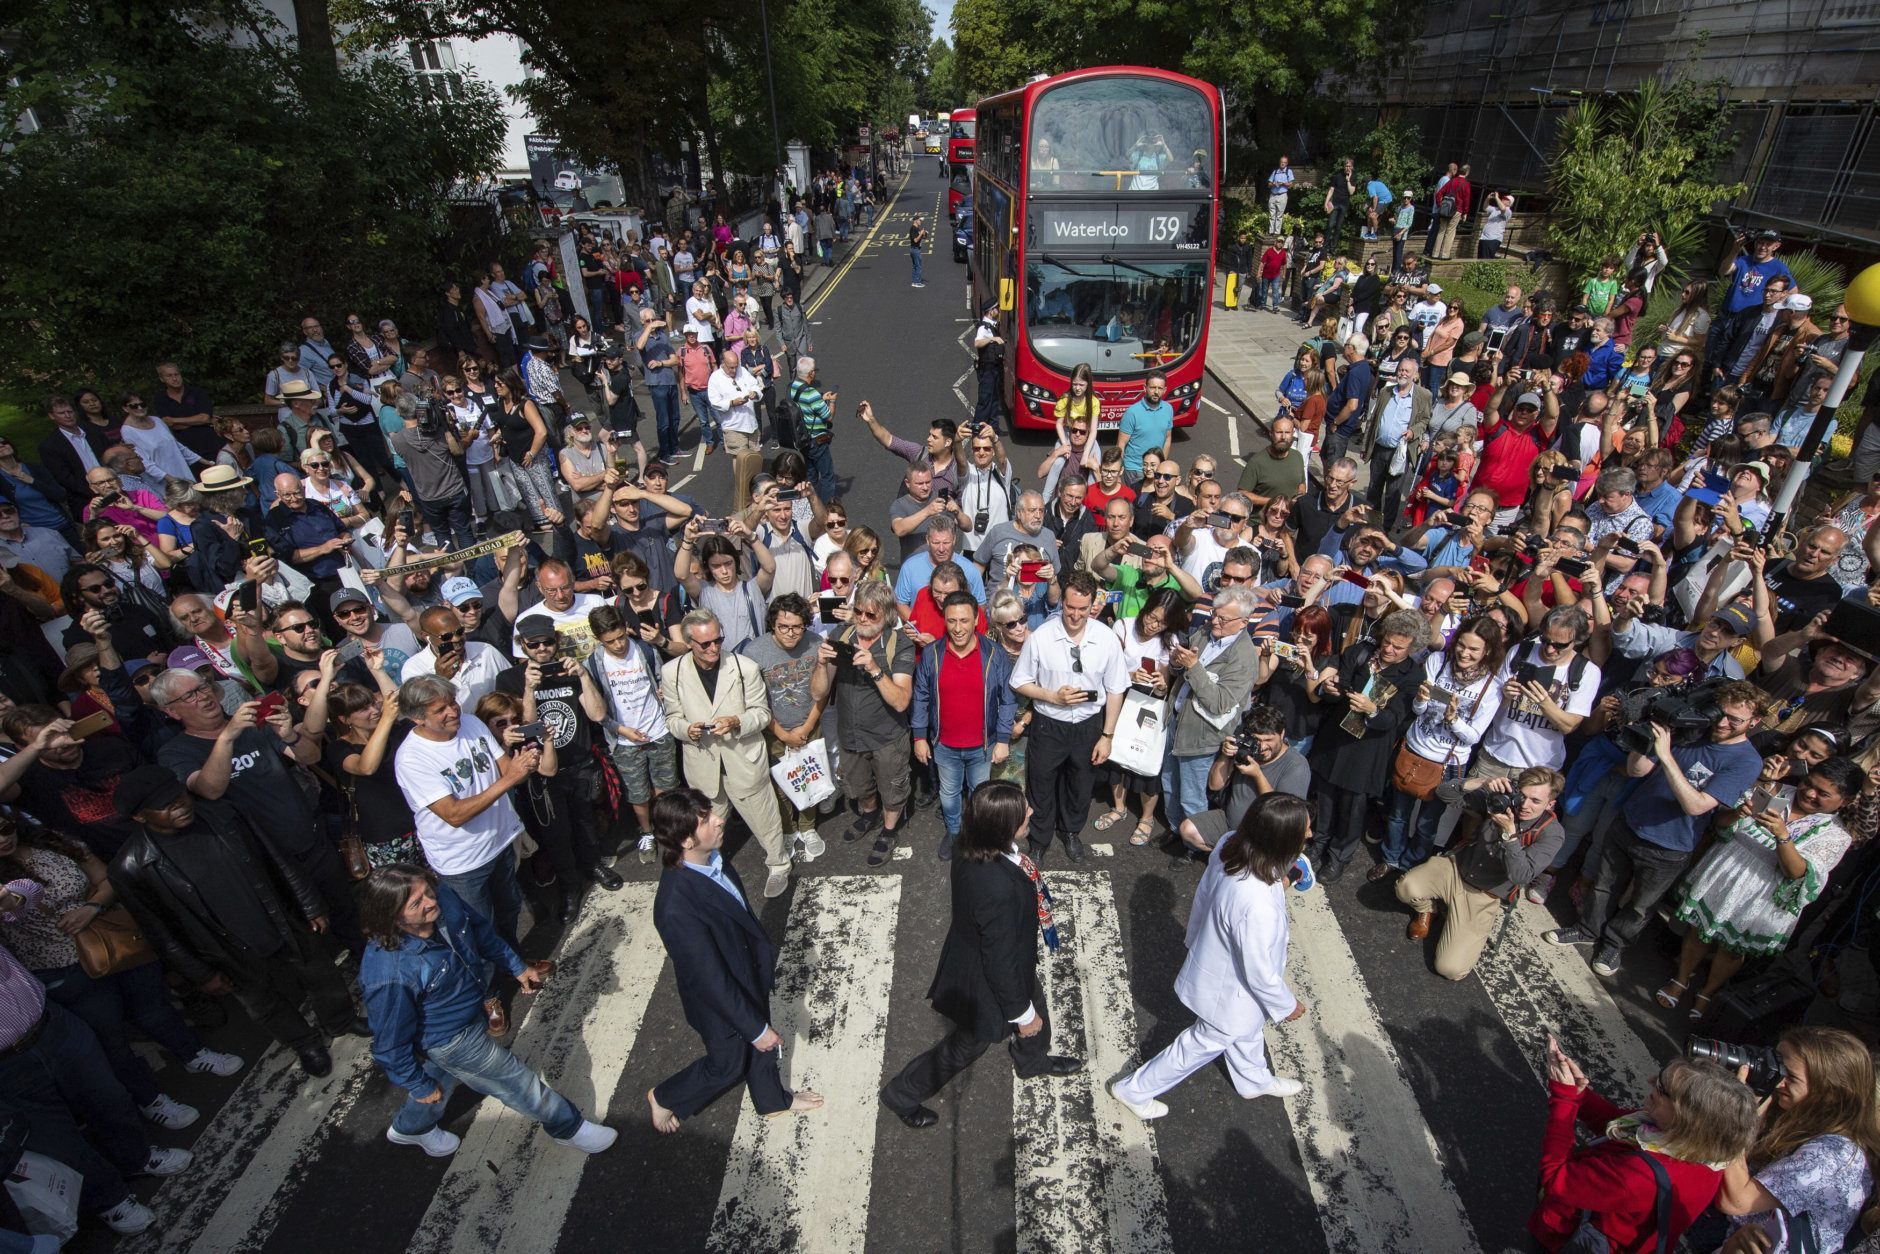 Thousands of fans gather to walk across the Abbey Road zebra crossing, on the 50th anniversary of British pop musicians The Beatles doing it for the cover of their album 'Abbey Road' in St Johns Wood in London, Thursday, Aug. 8, 2019. They aimed to cross 50 years to the minute since the 'Fab Four' were photographed for the album.(Dominic Lipinski/PA via AP)